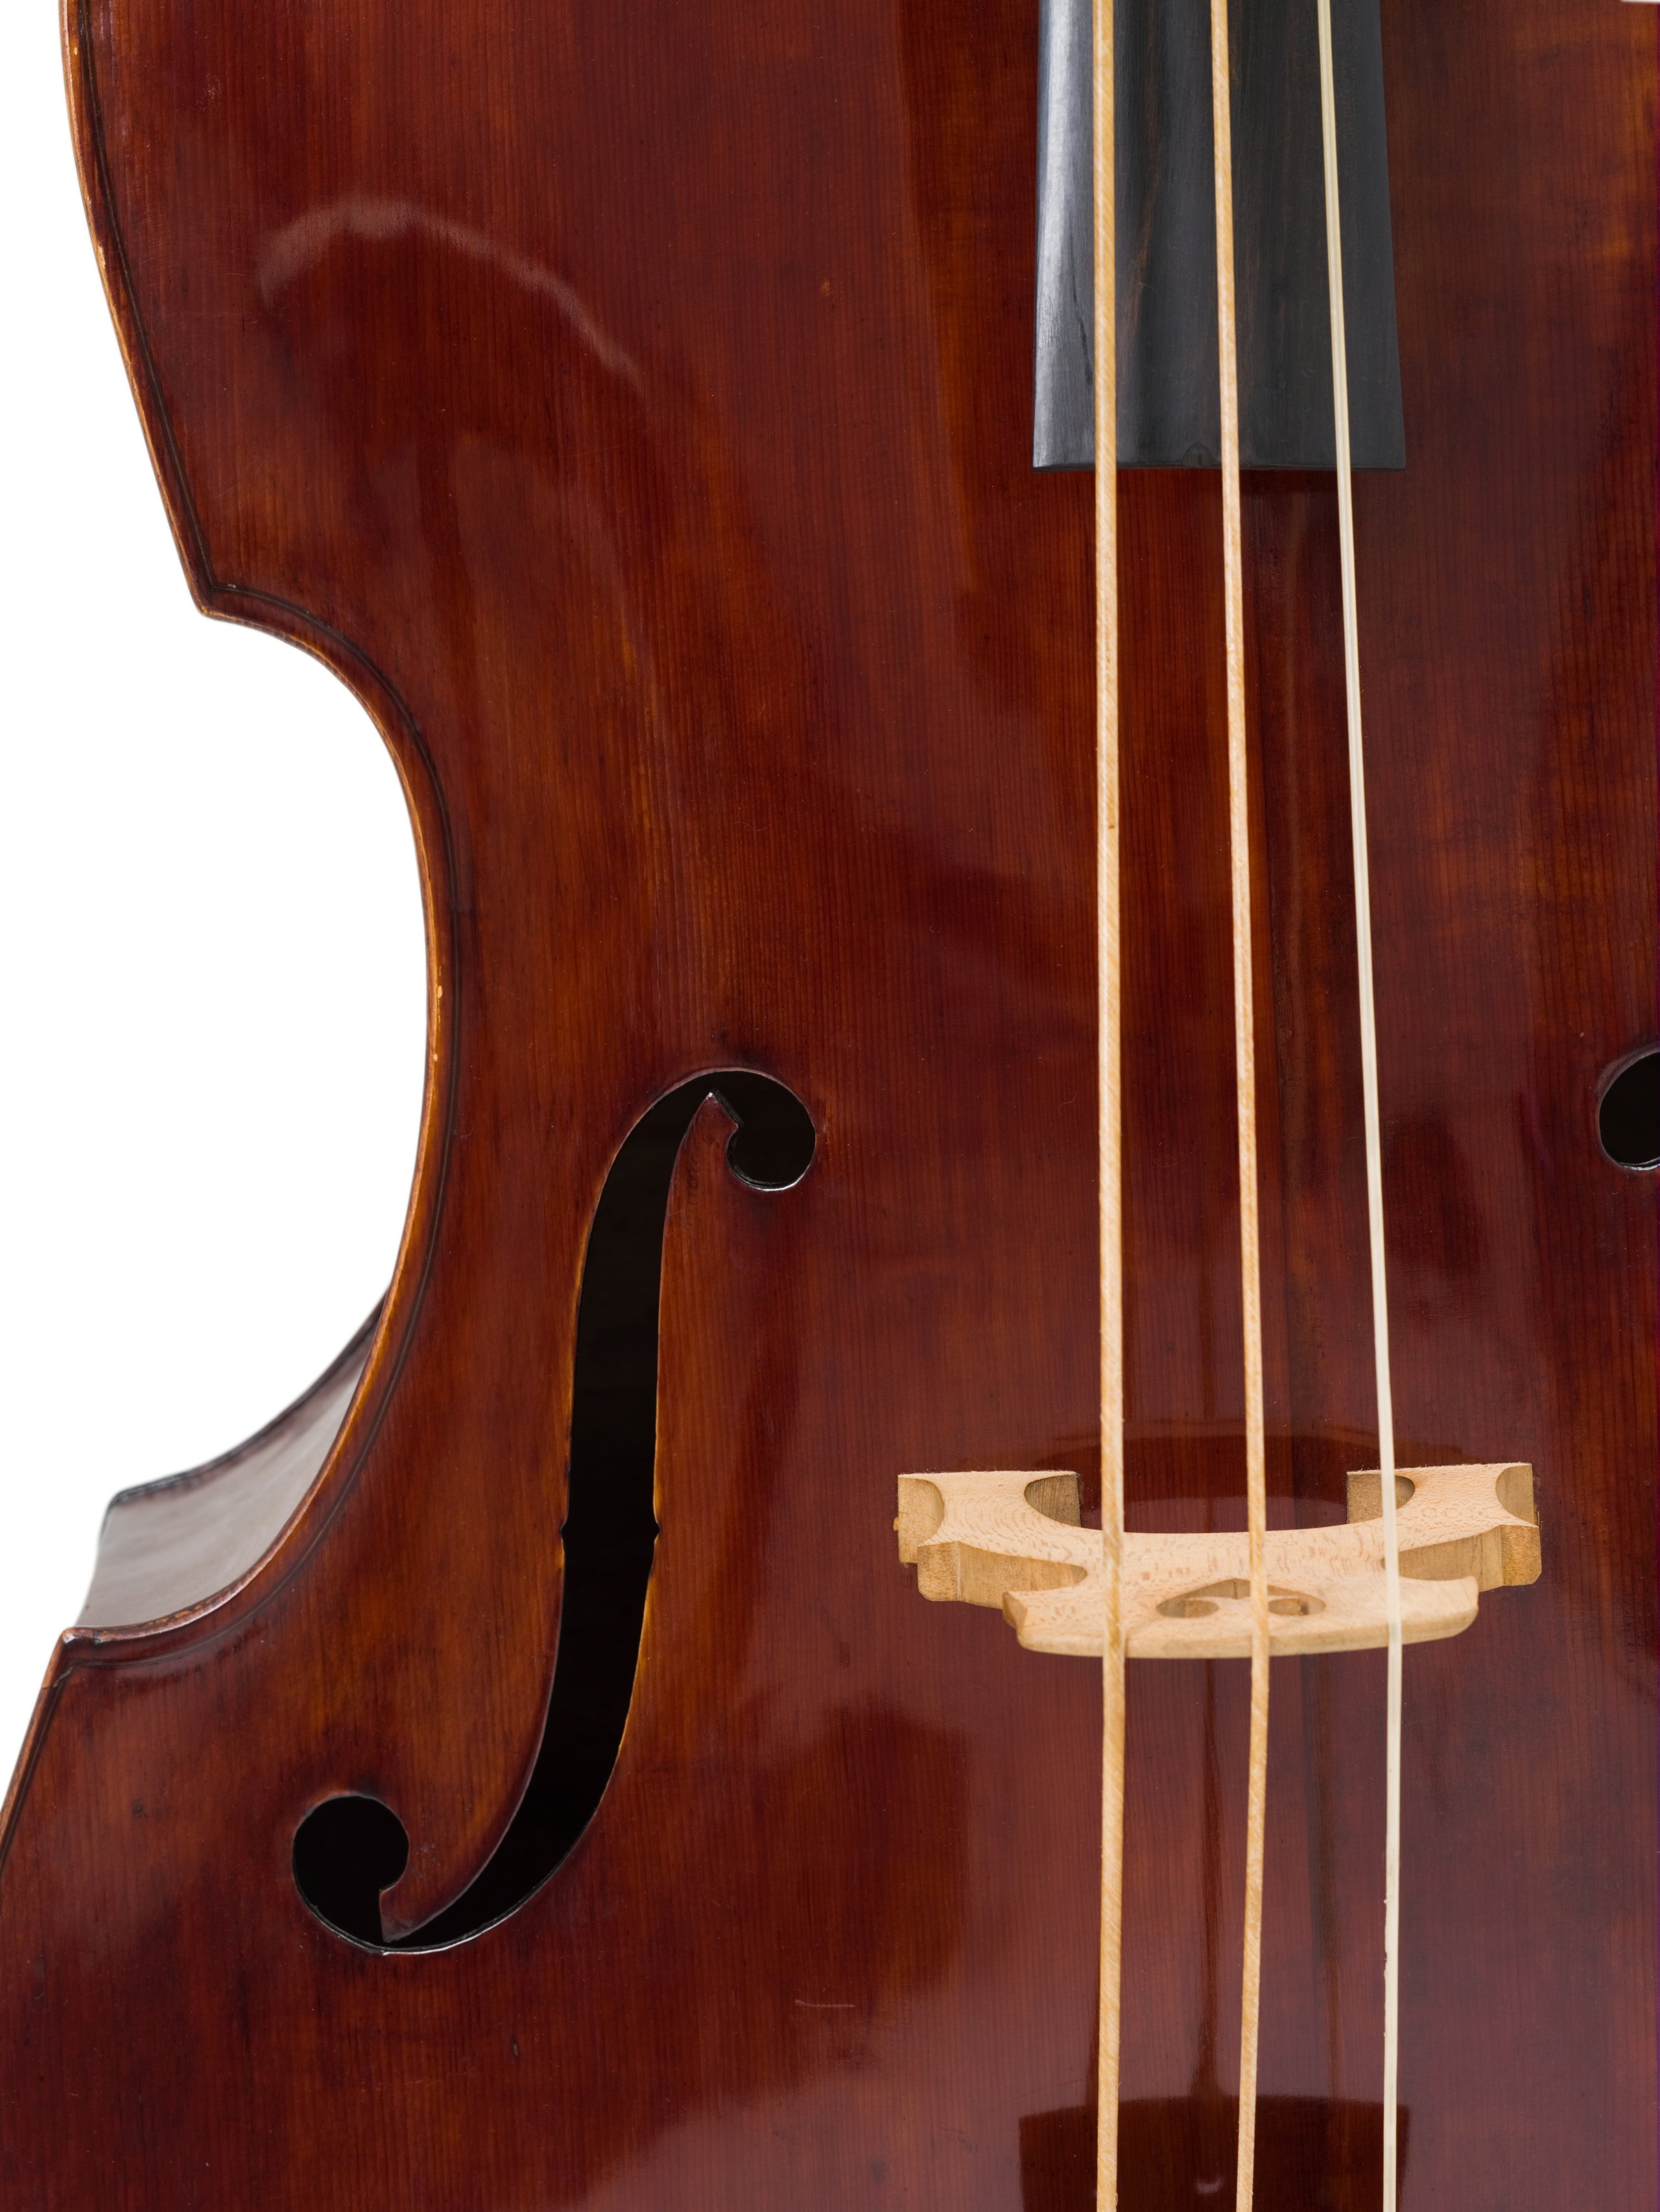 Double bass made by John Devereux